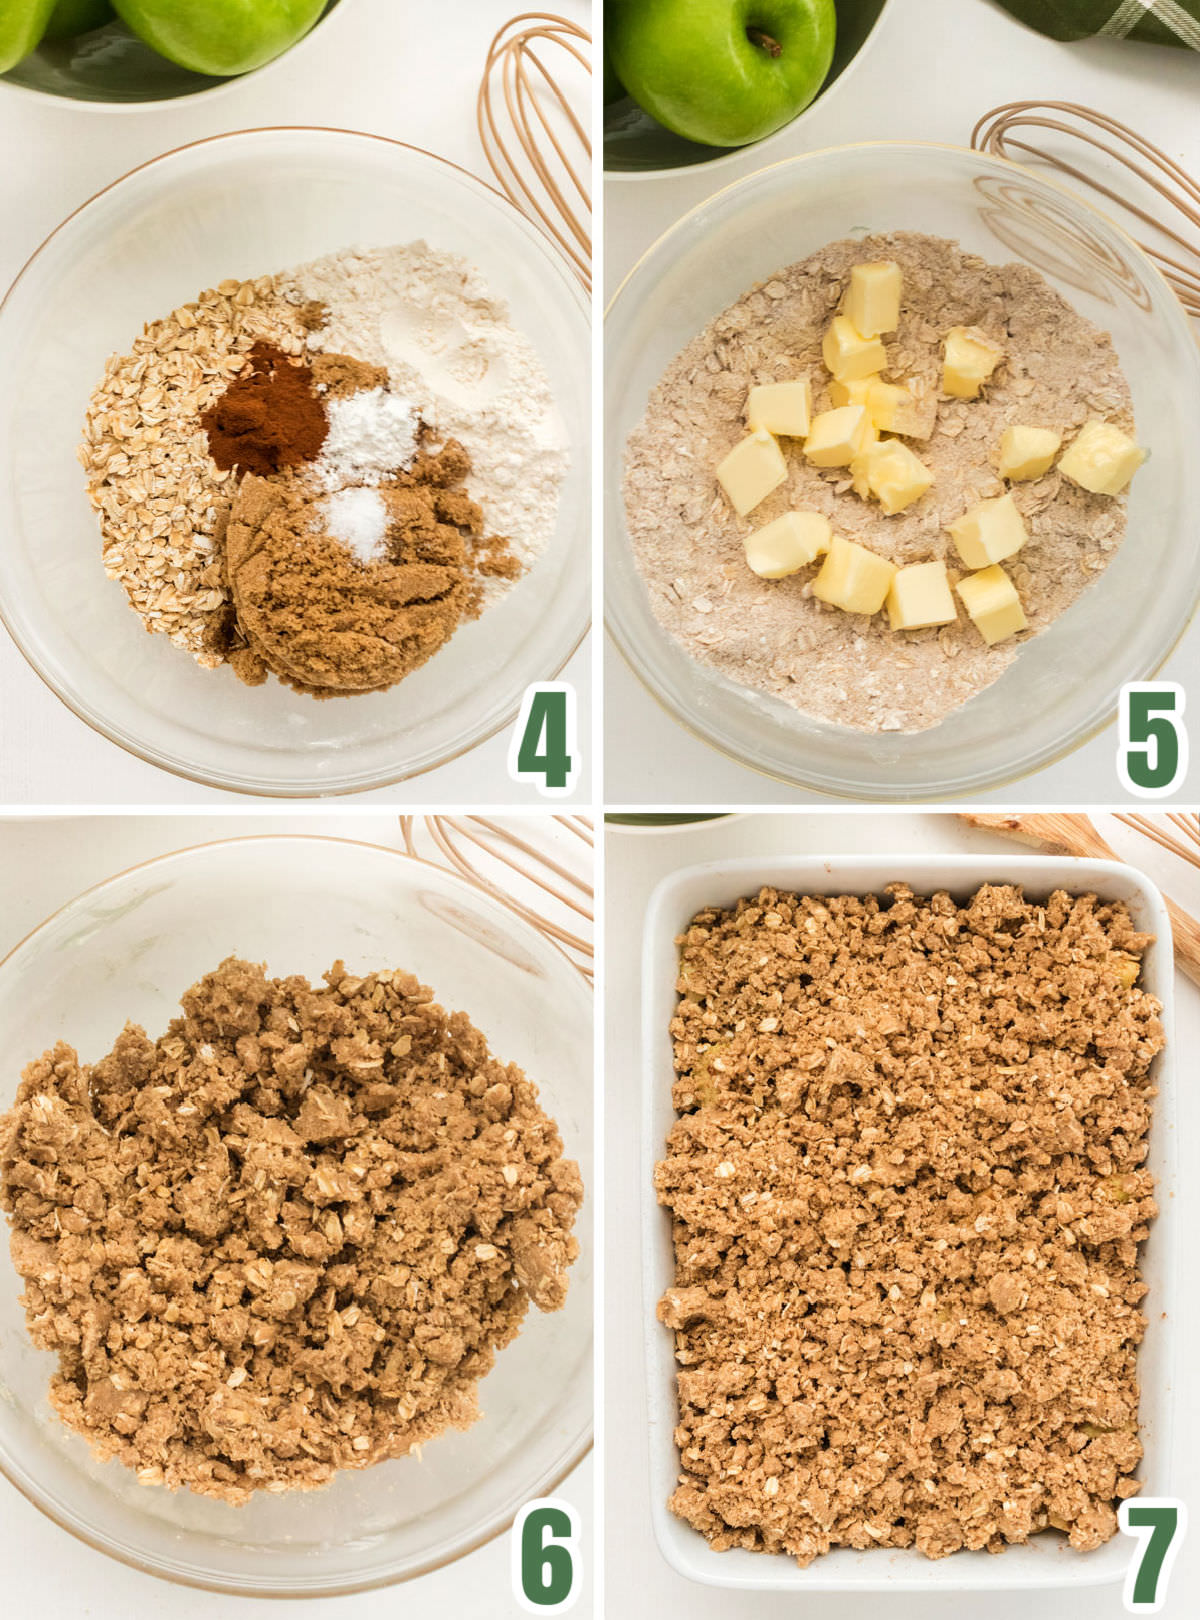 Collage image showing the steps for making the oat topping for the Apple Crisp.